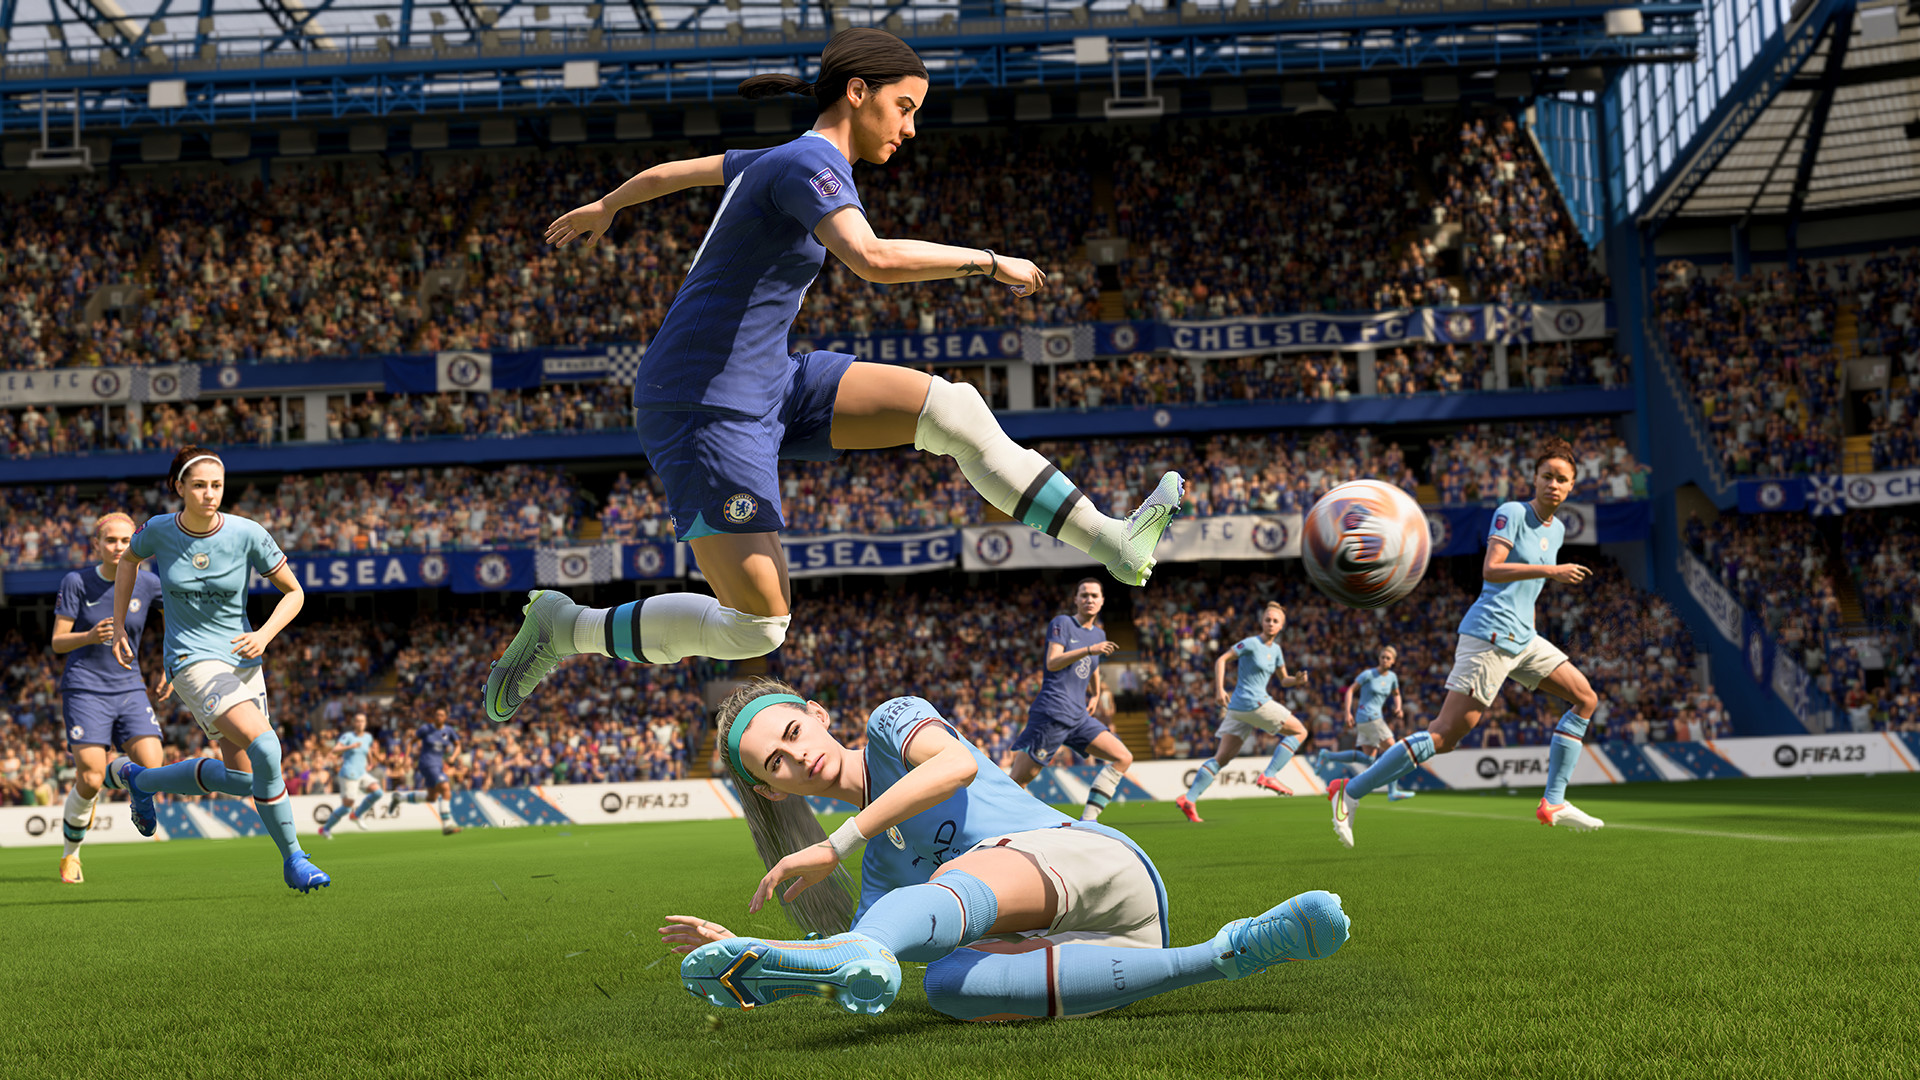 FIFA 23 Ultimate Edition TR XBOX One / Xbox Series X,S CD Key